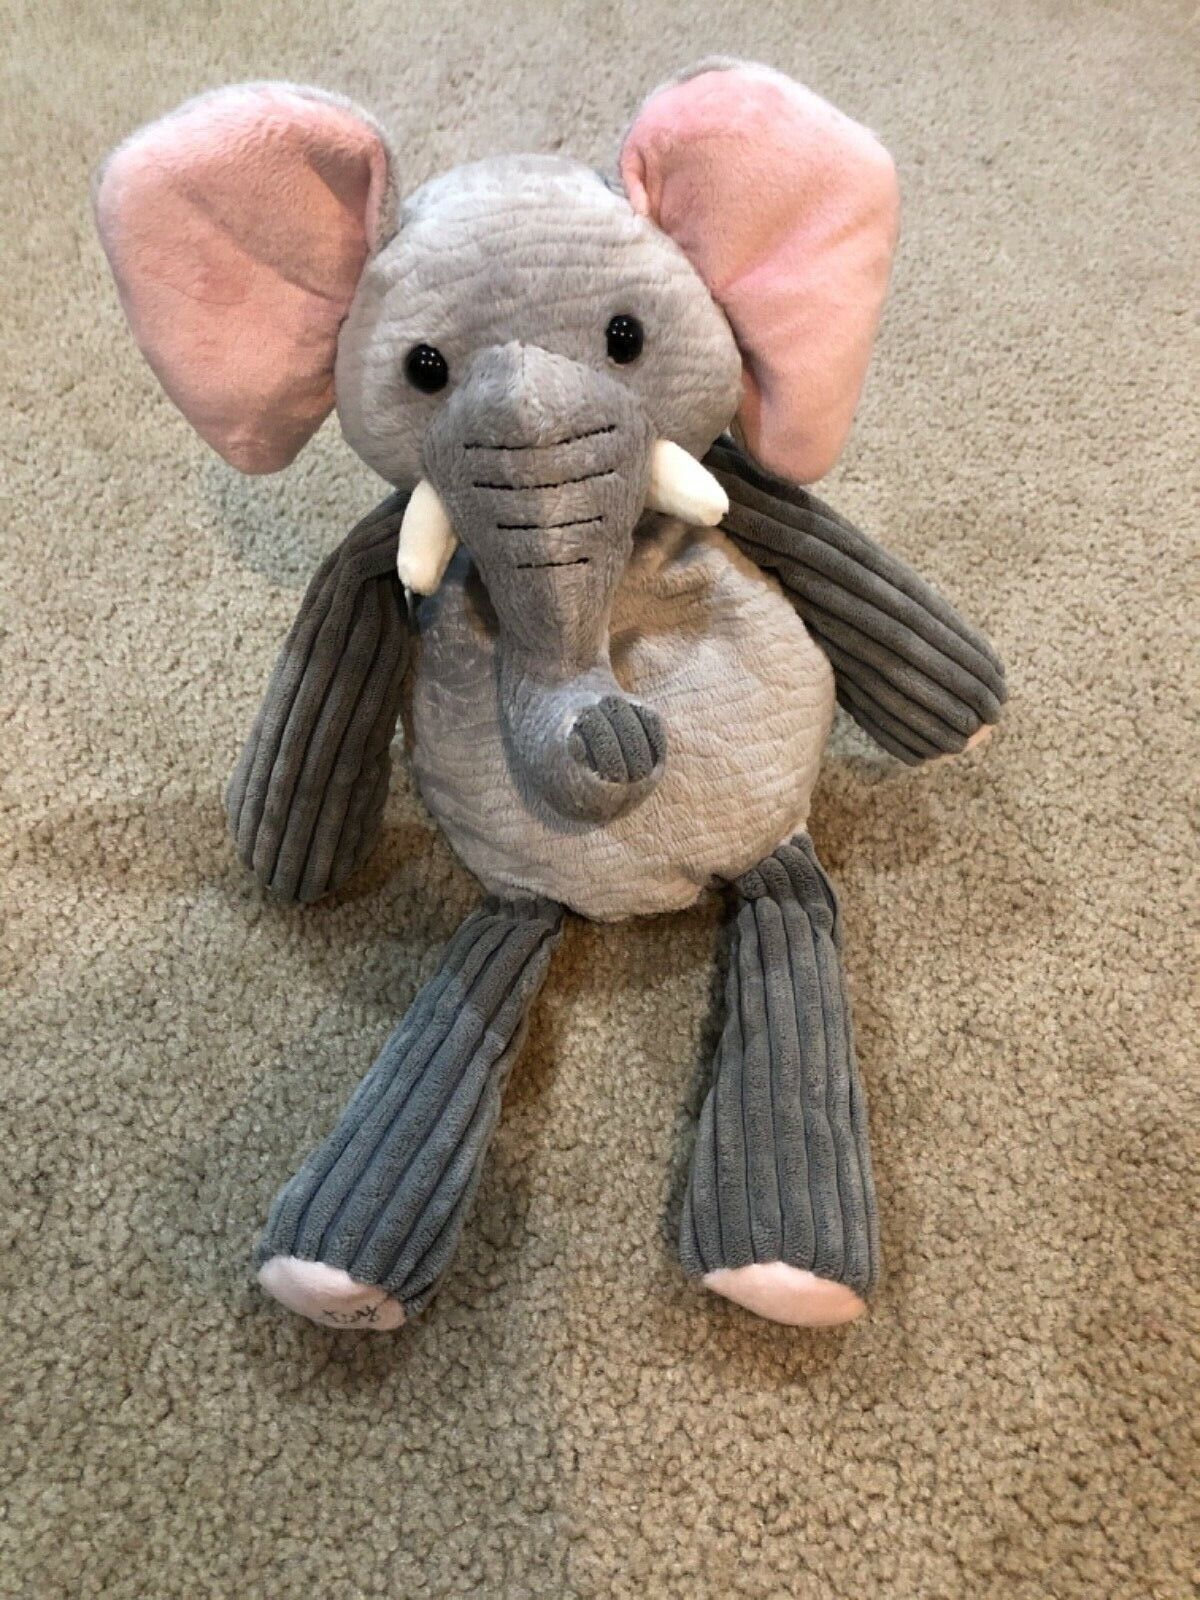 Primary image for Scentsy Buddy Ollie The Gray Elephant Plush Stuffed Animal 15” 2010 w/ scent pk